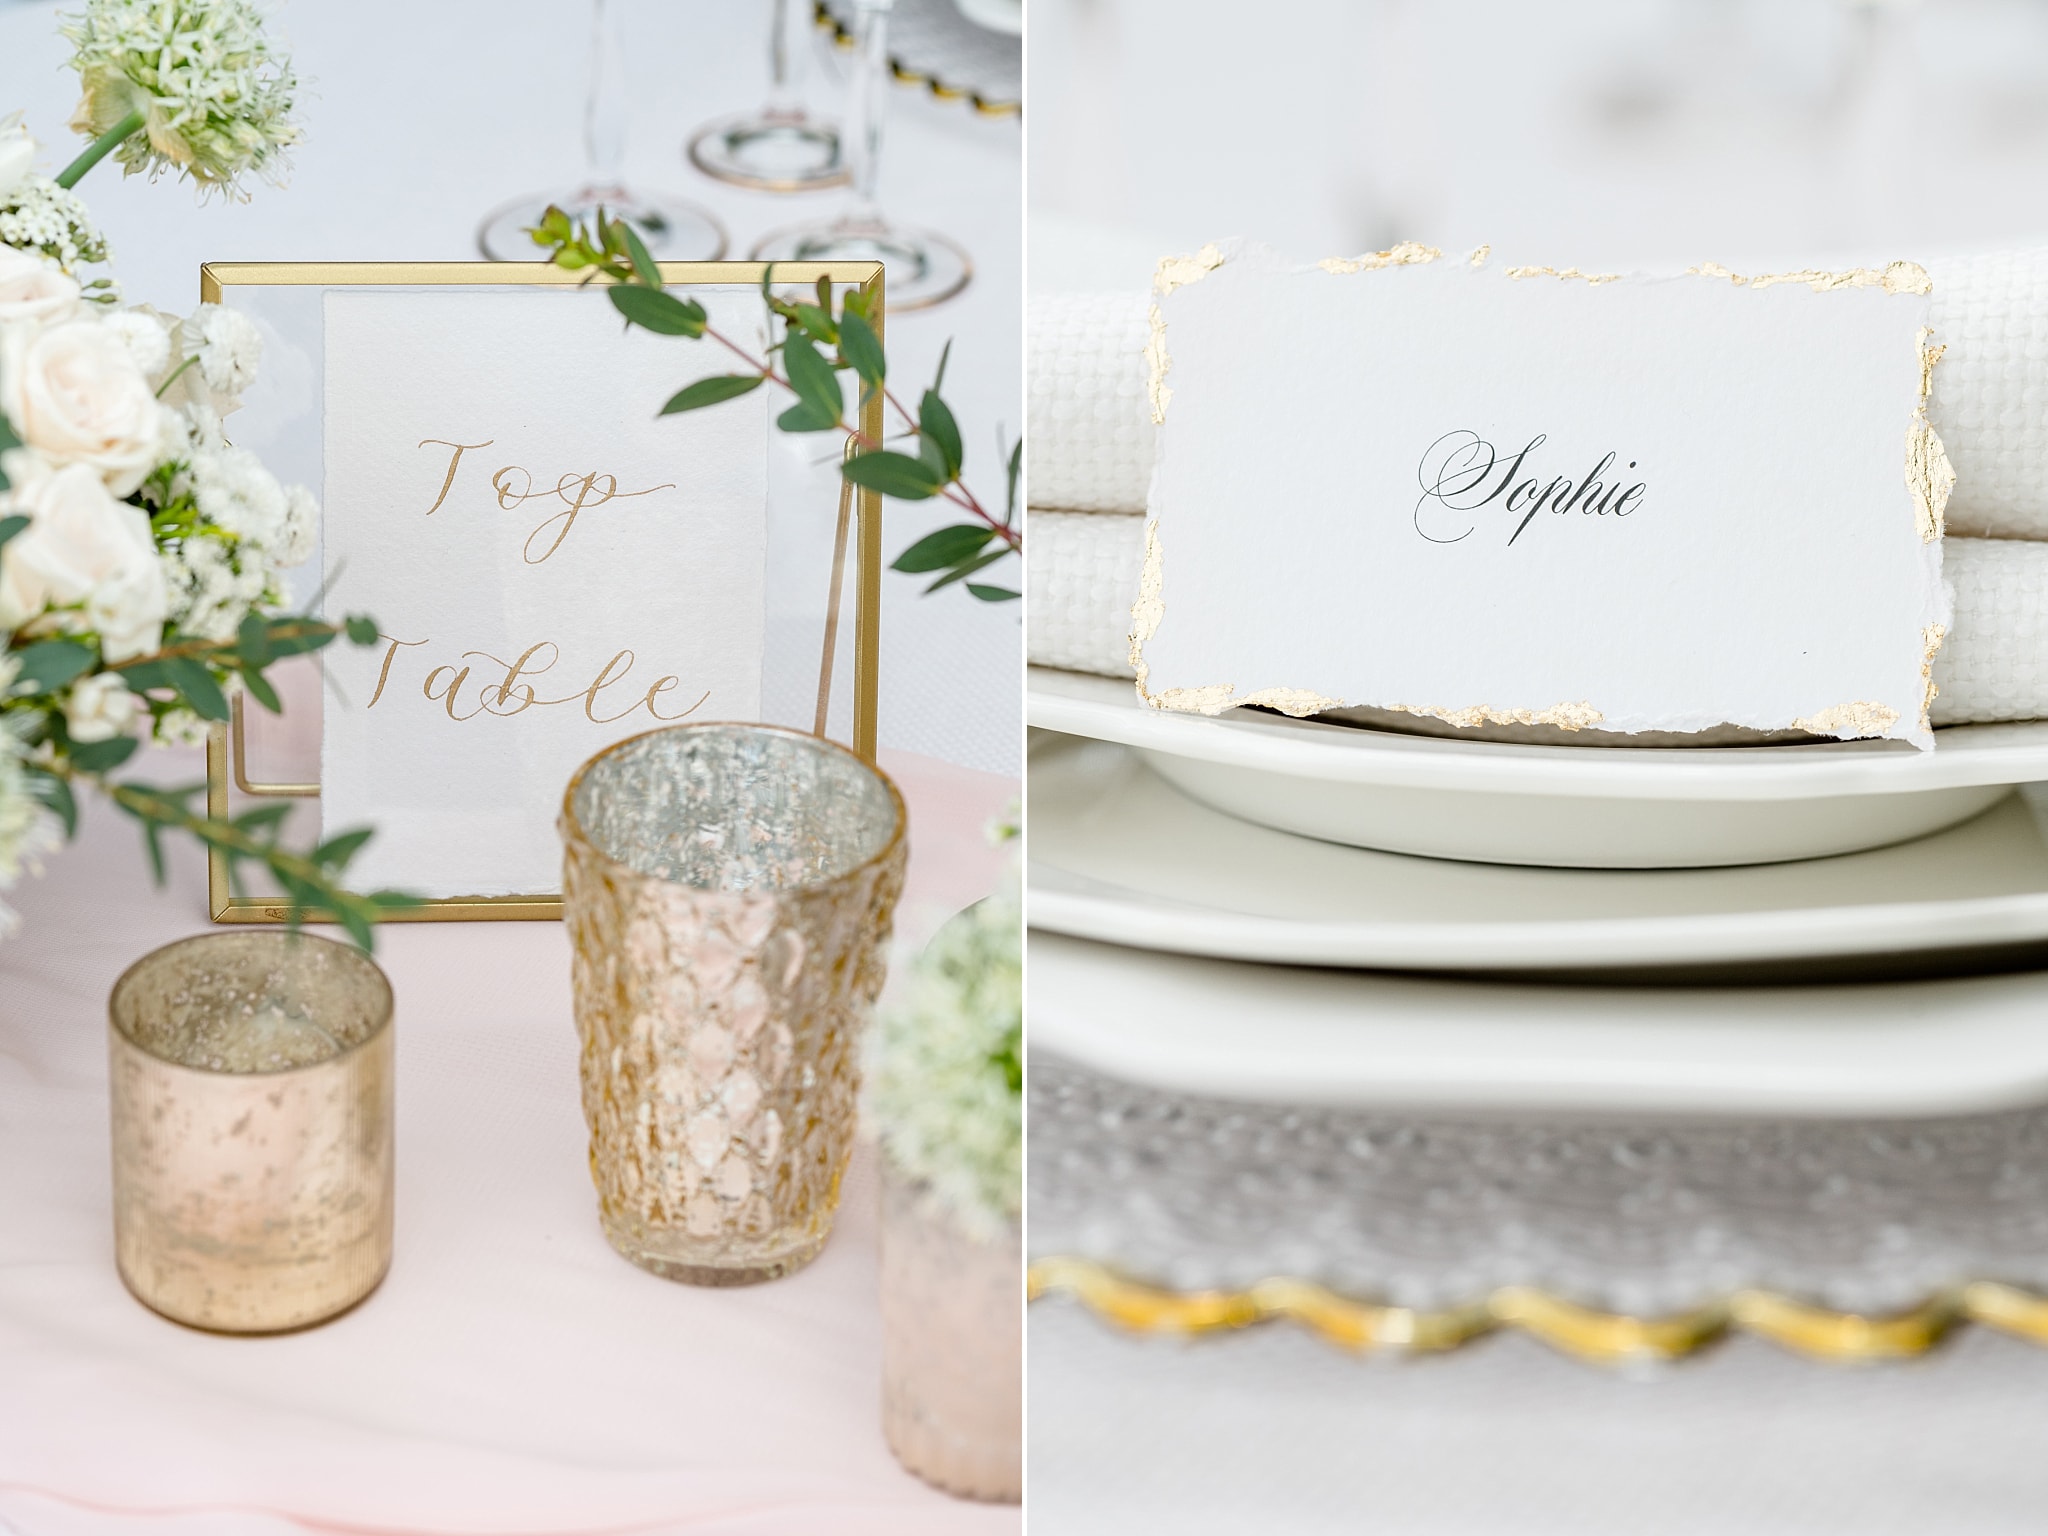 Gold leaf and deckled edge placename on top of layers of white crockery and linen